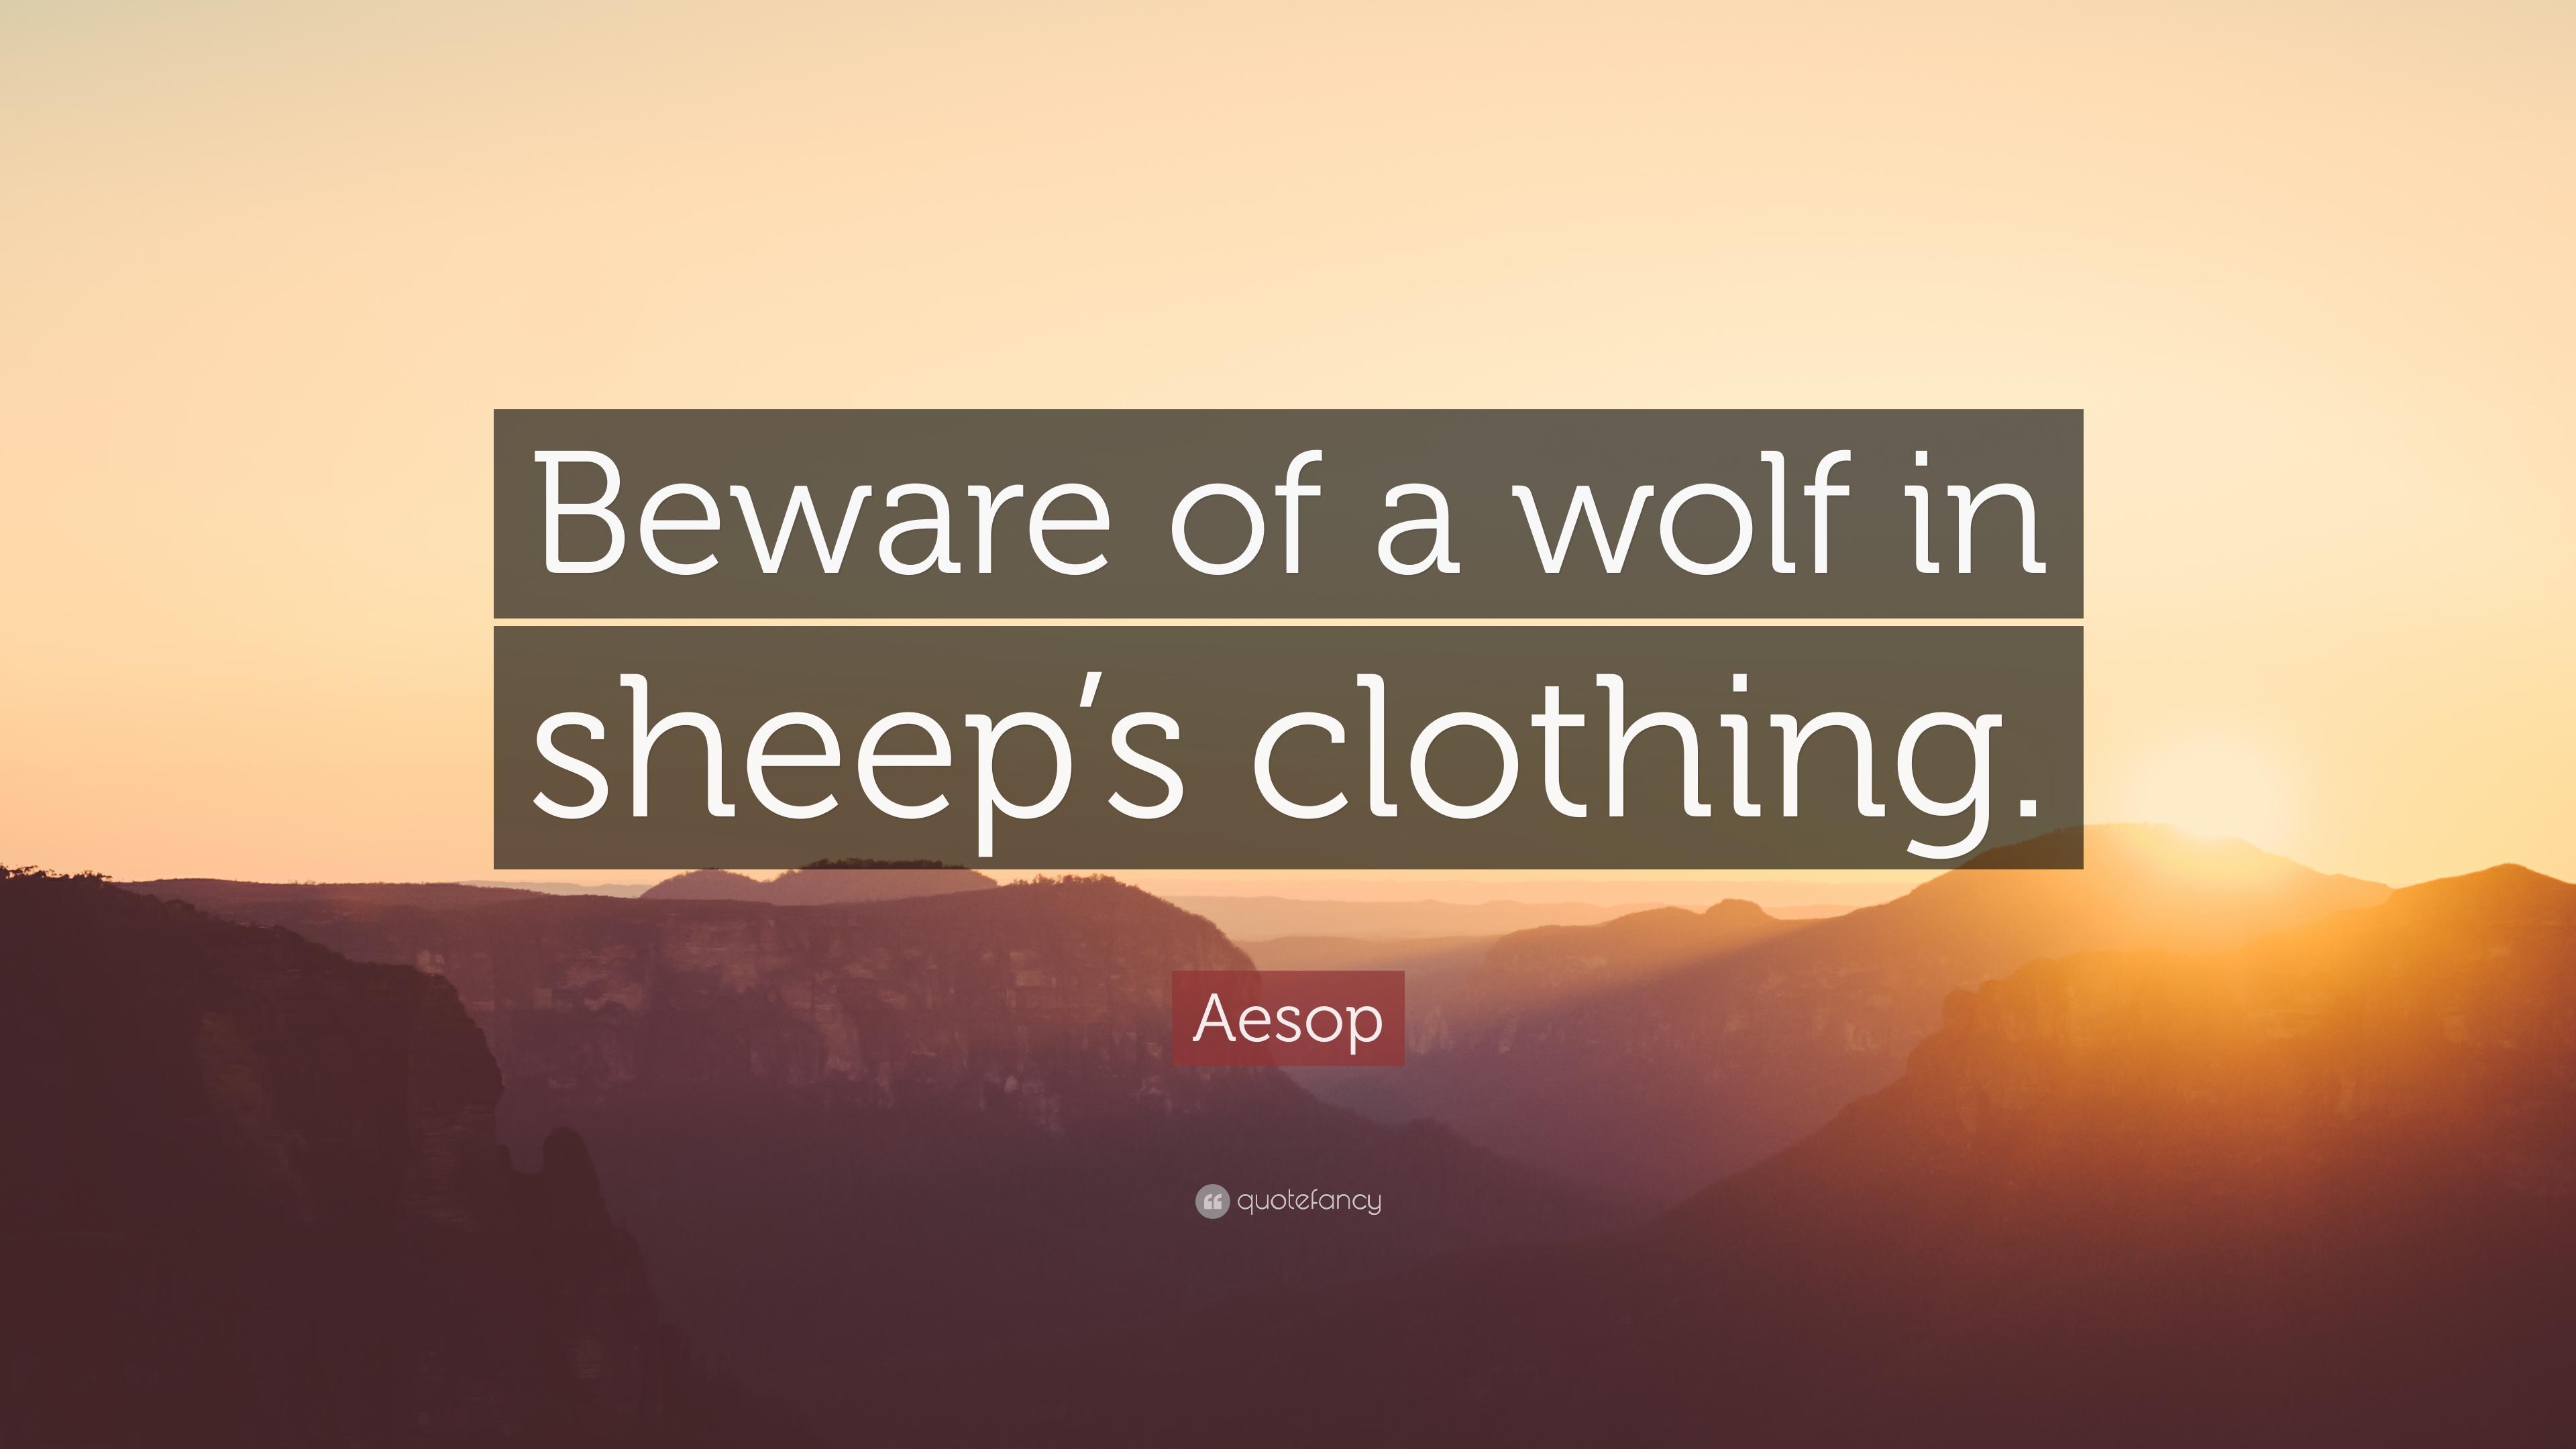 Aesop Quote: “Beware of a wolf in sheep's clothing.” 10 wallpaper